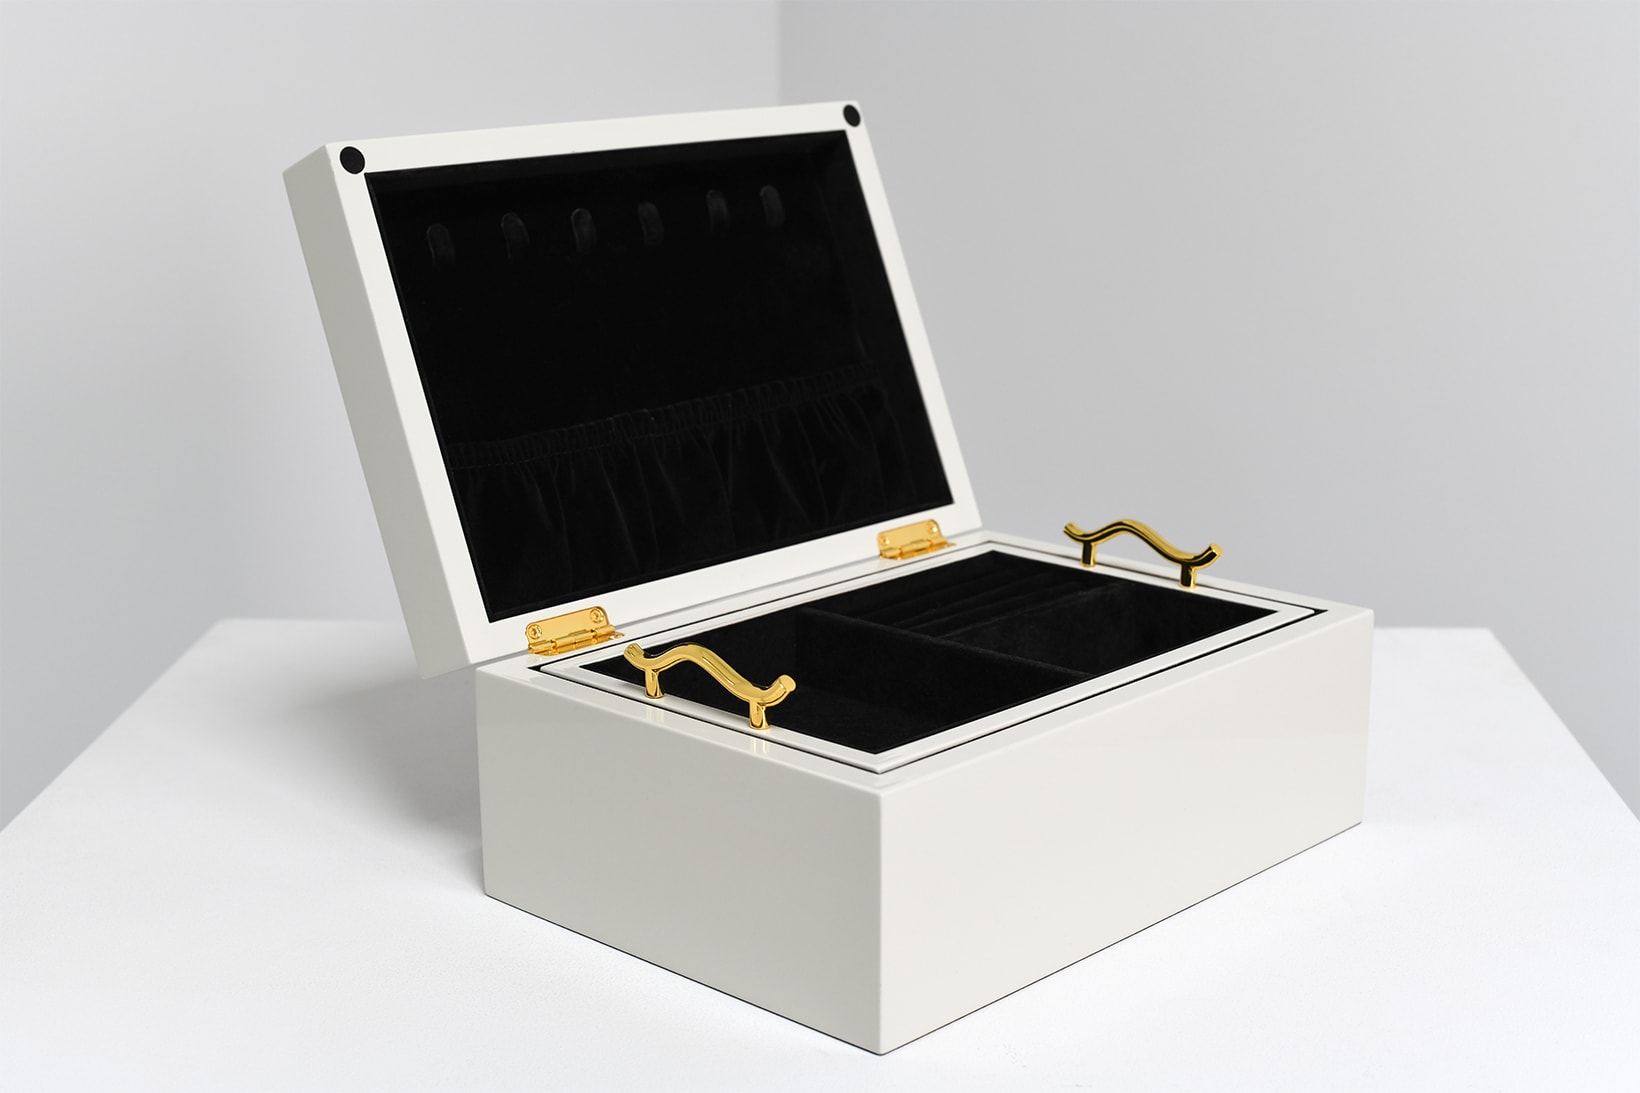 The inside of the white jewelry box